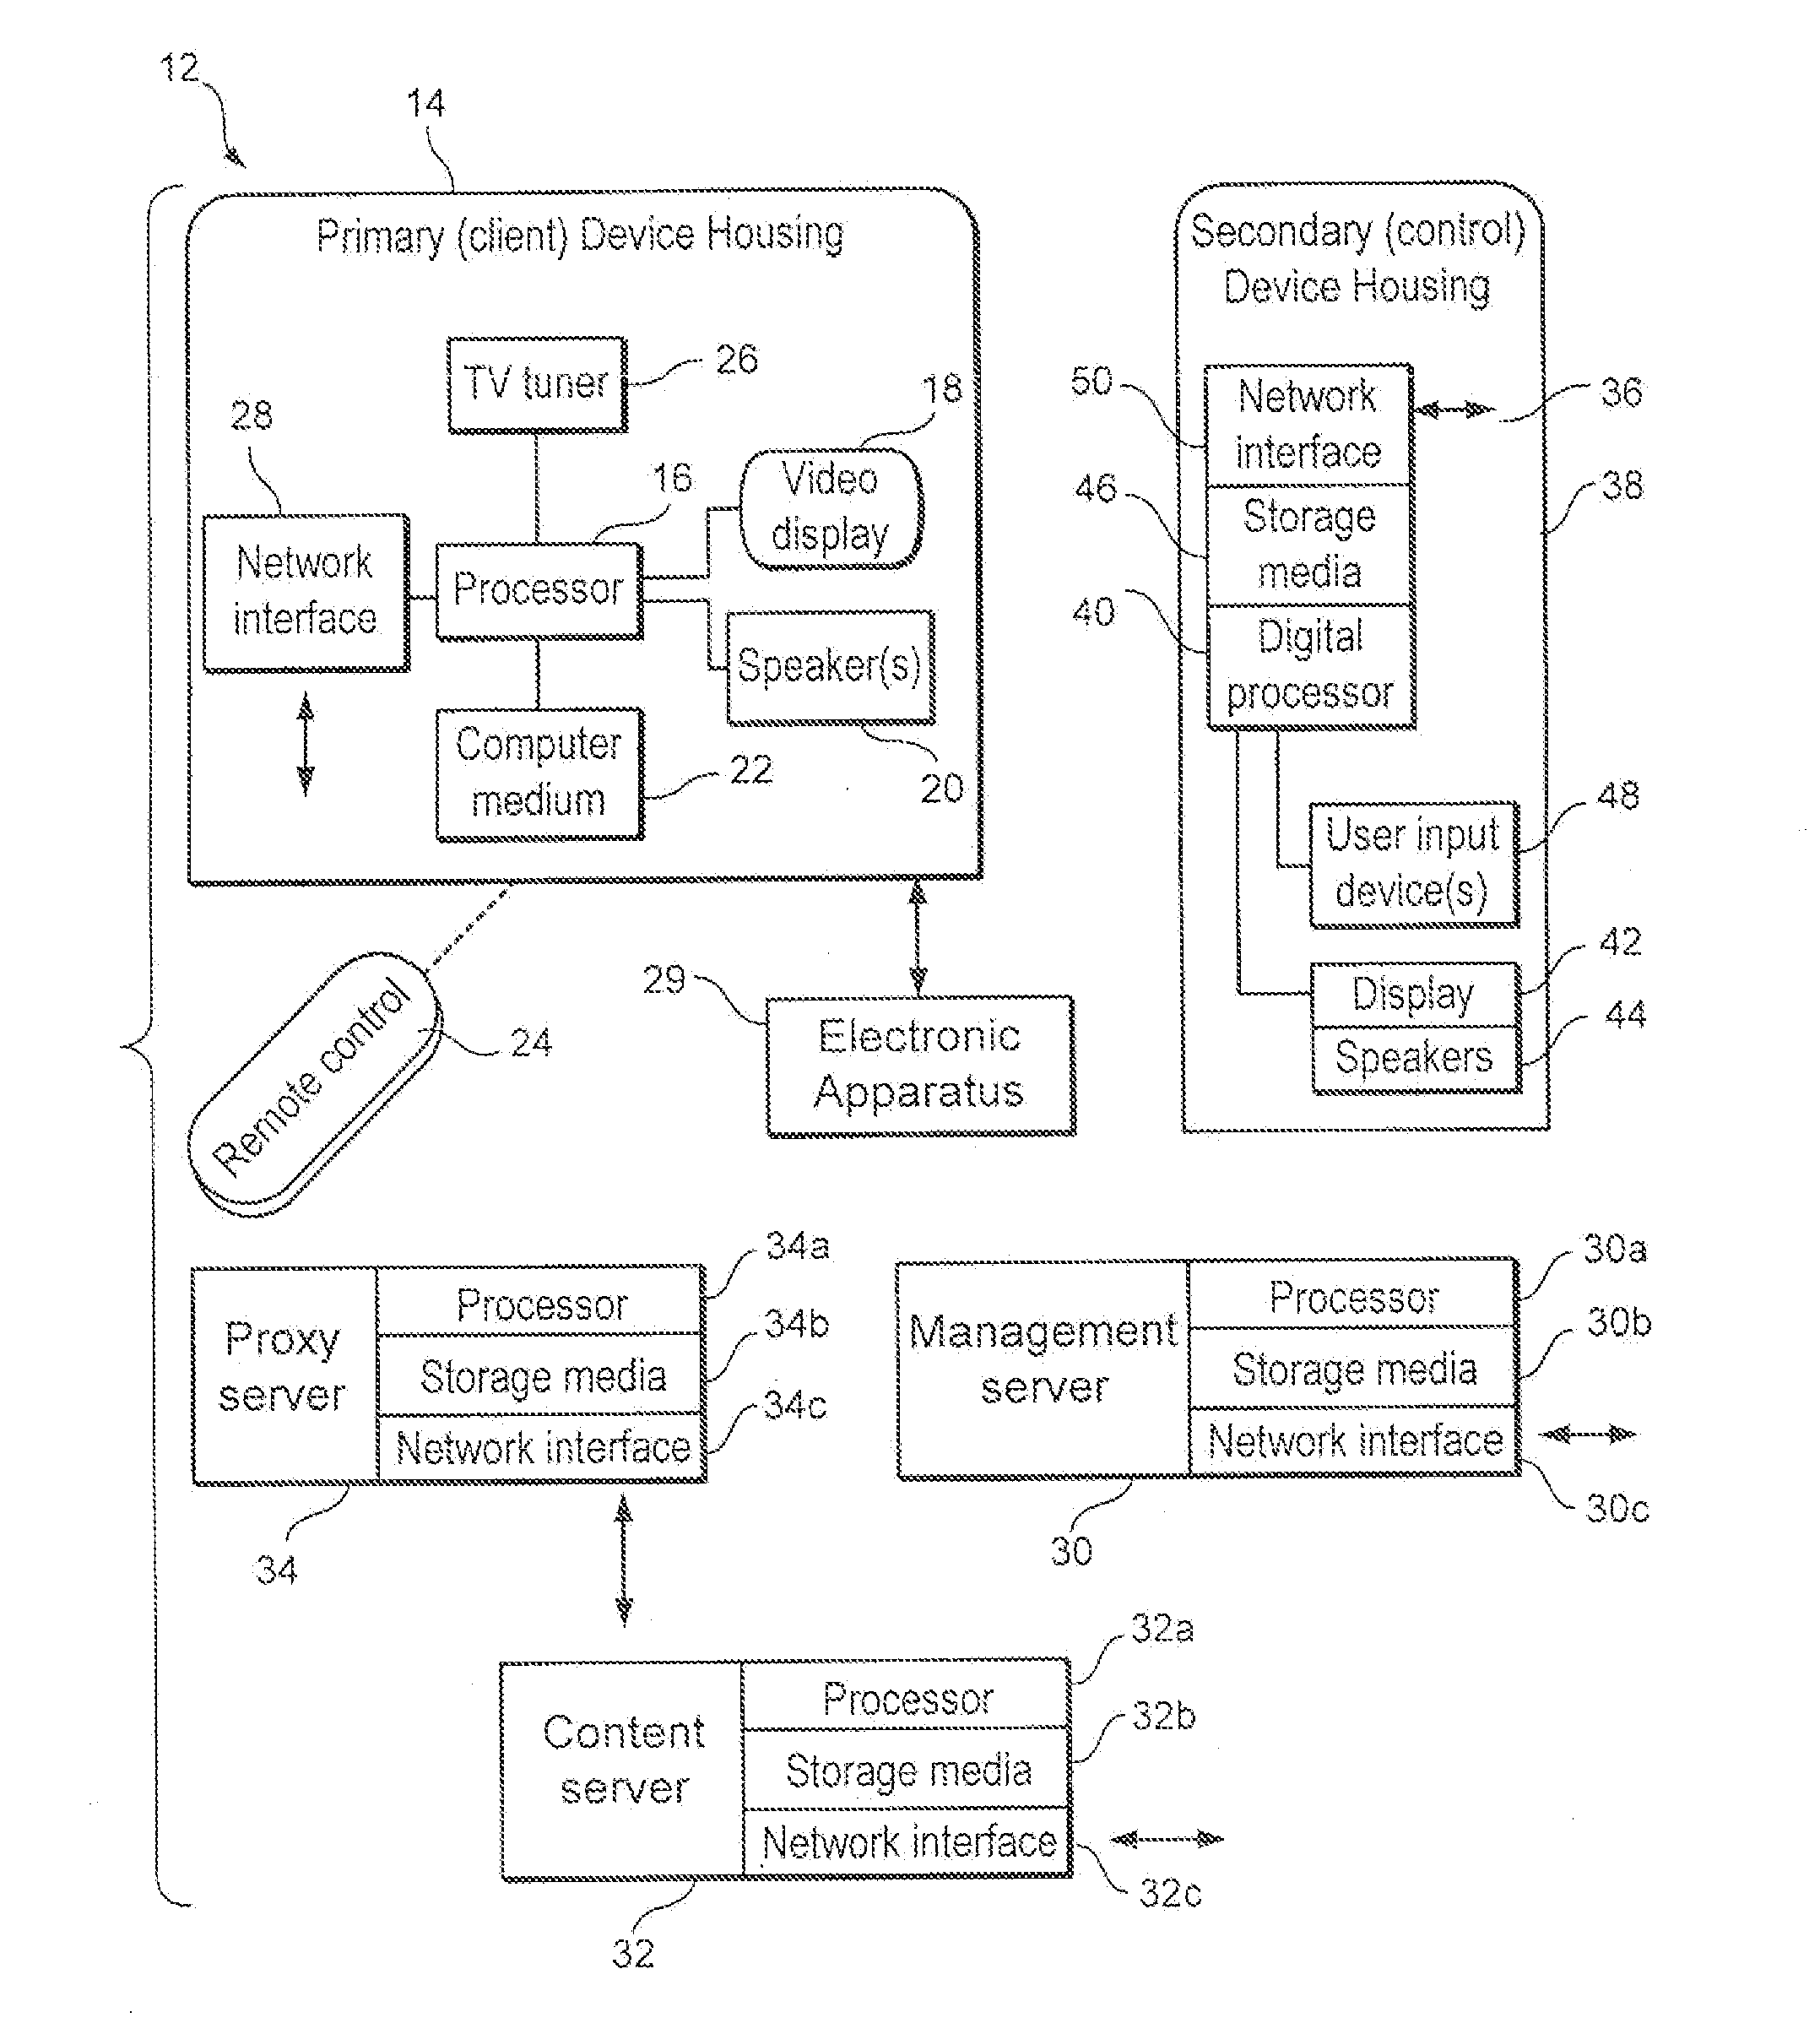 METHOD AND APARATUS FOR SHARING INTERNET ASSETS OR CONTENT URLs VIA A SECOND DISPLAY DEVICE